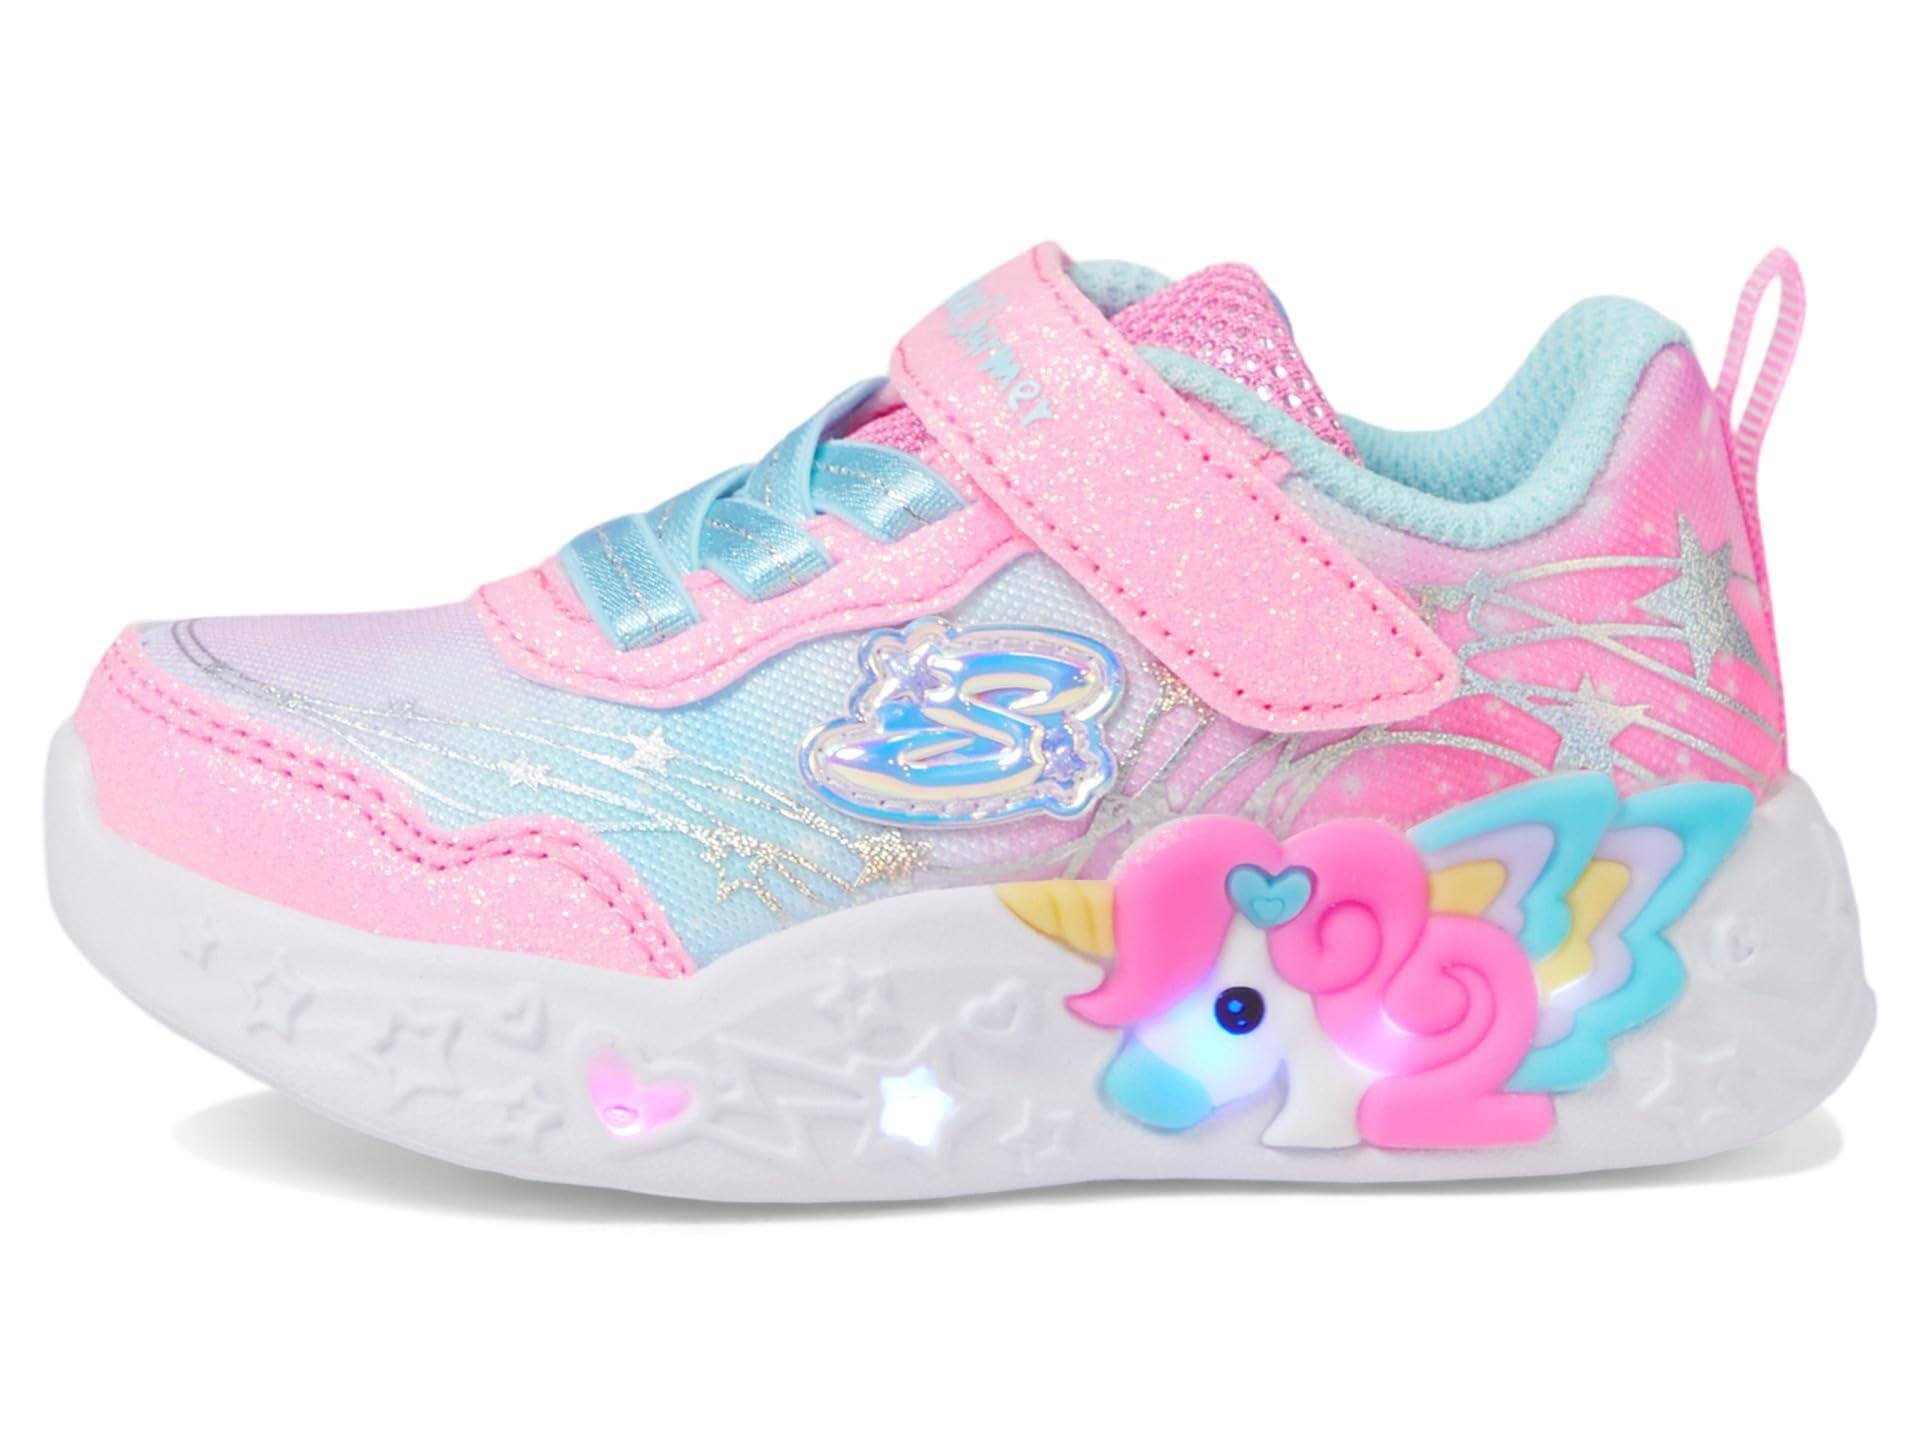 Magical Unicorn Dreams Shoes for Kids | Image